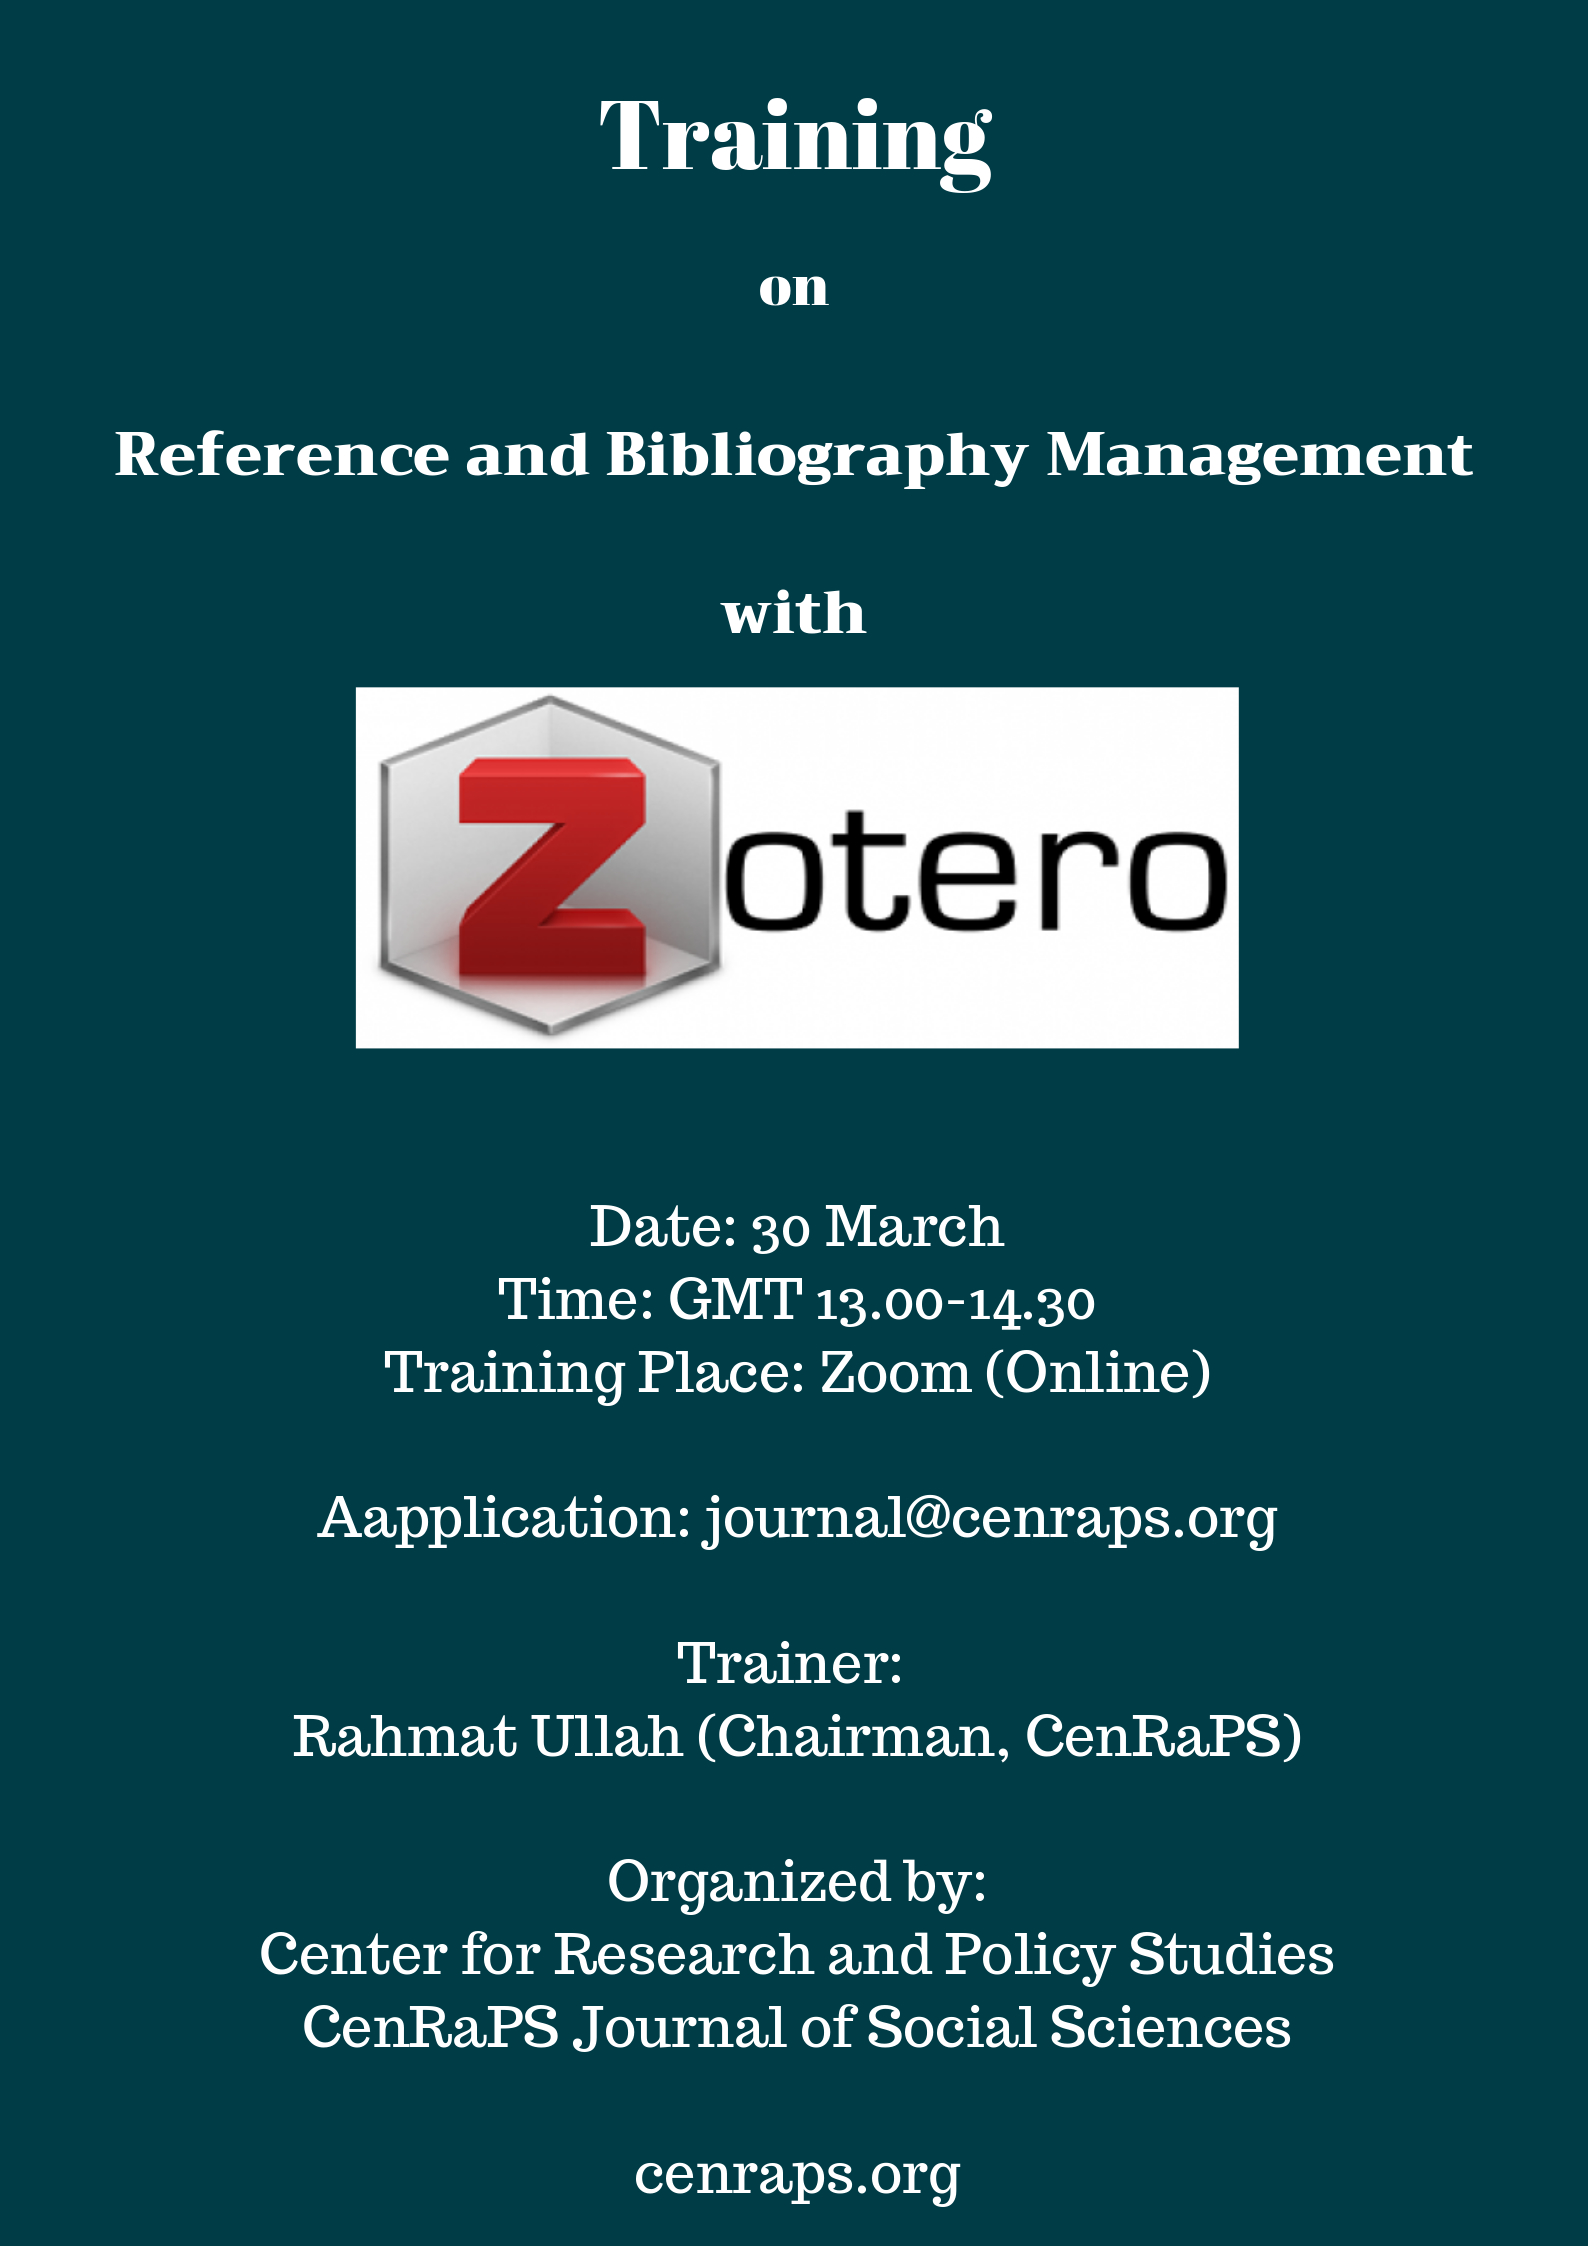 Training-on-Zotero-2 Training on Reference and Bibliography Management